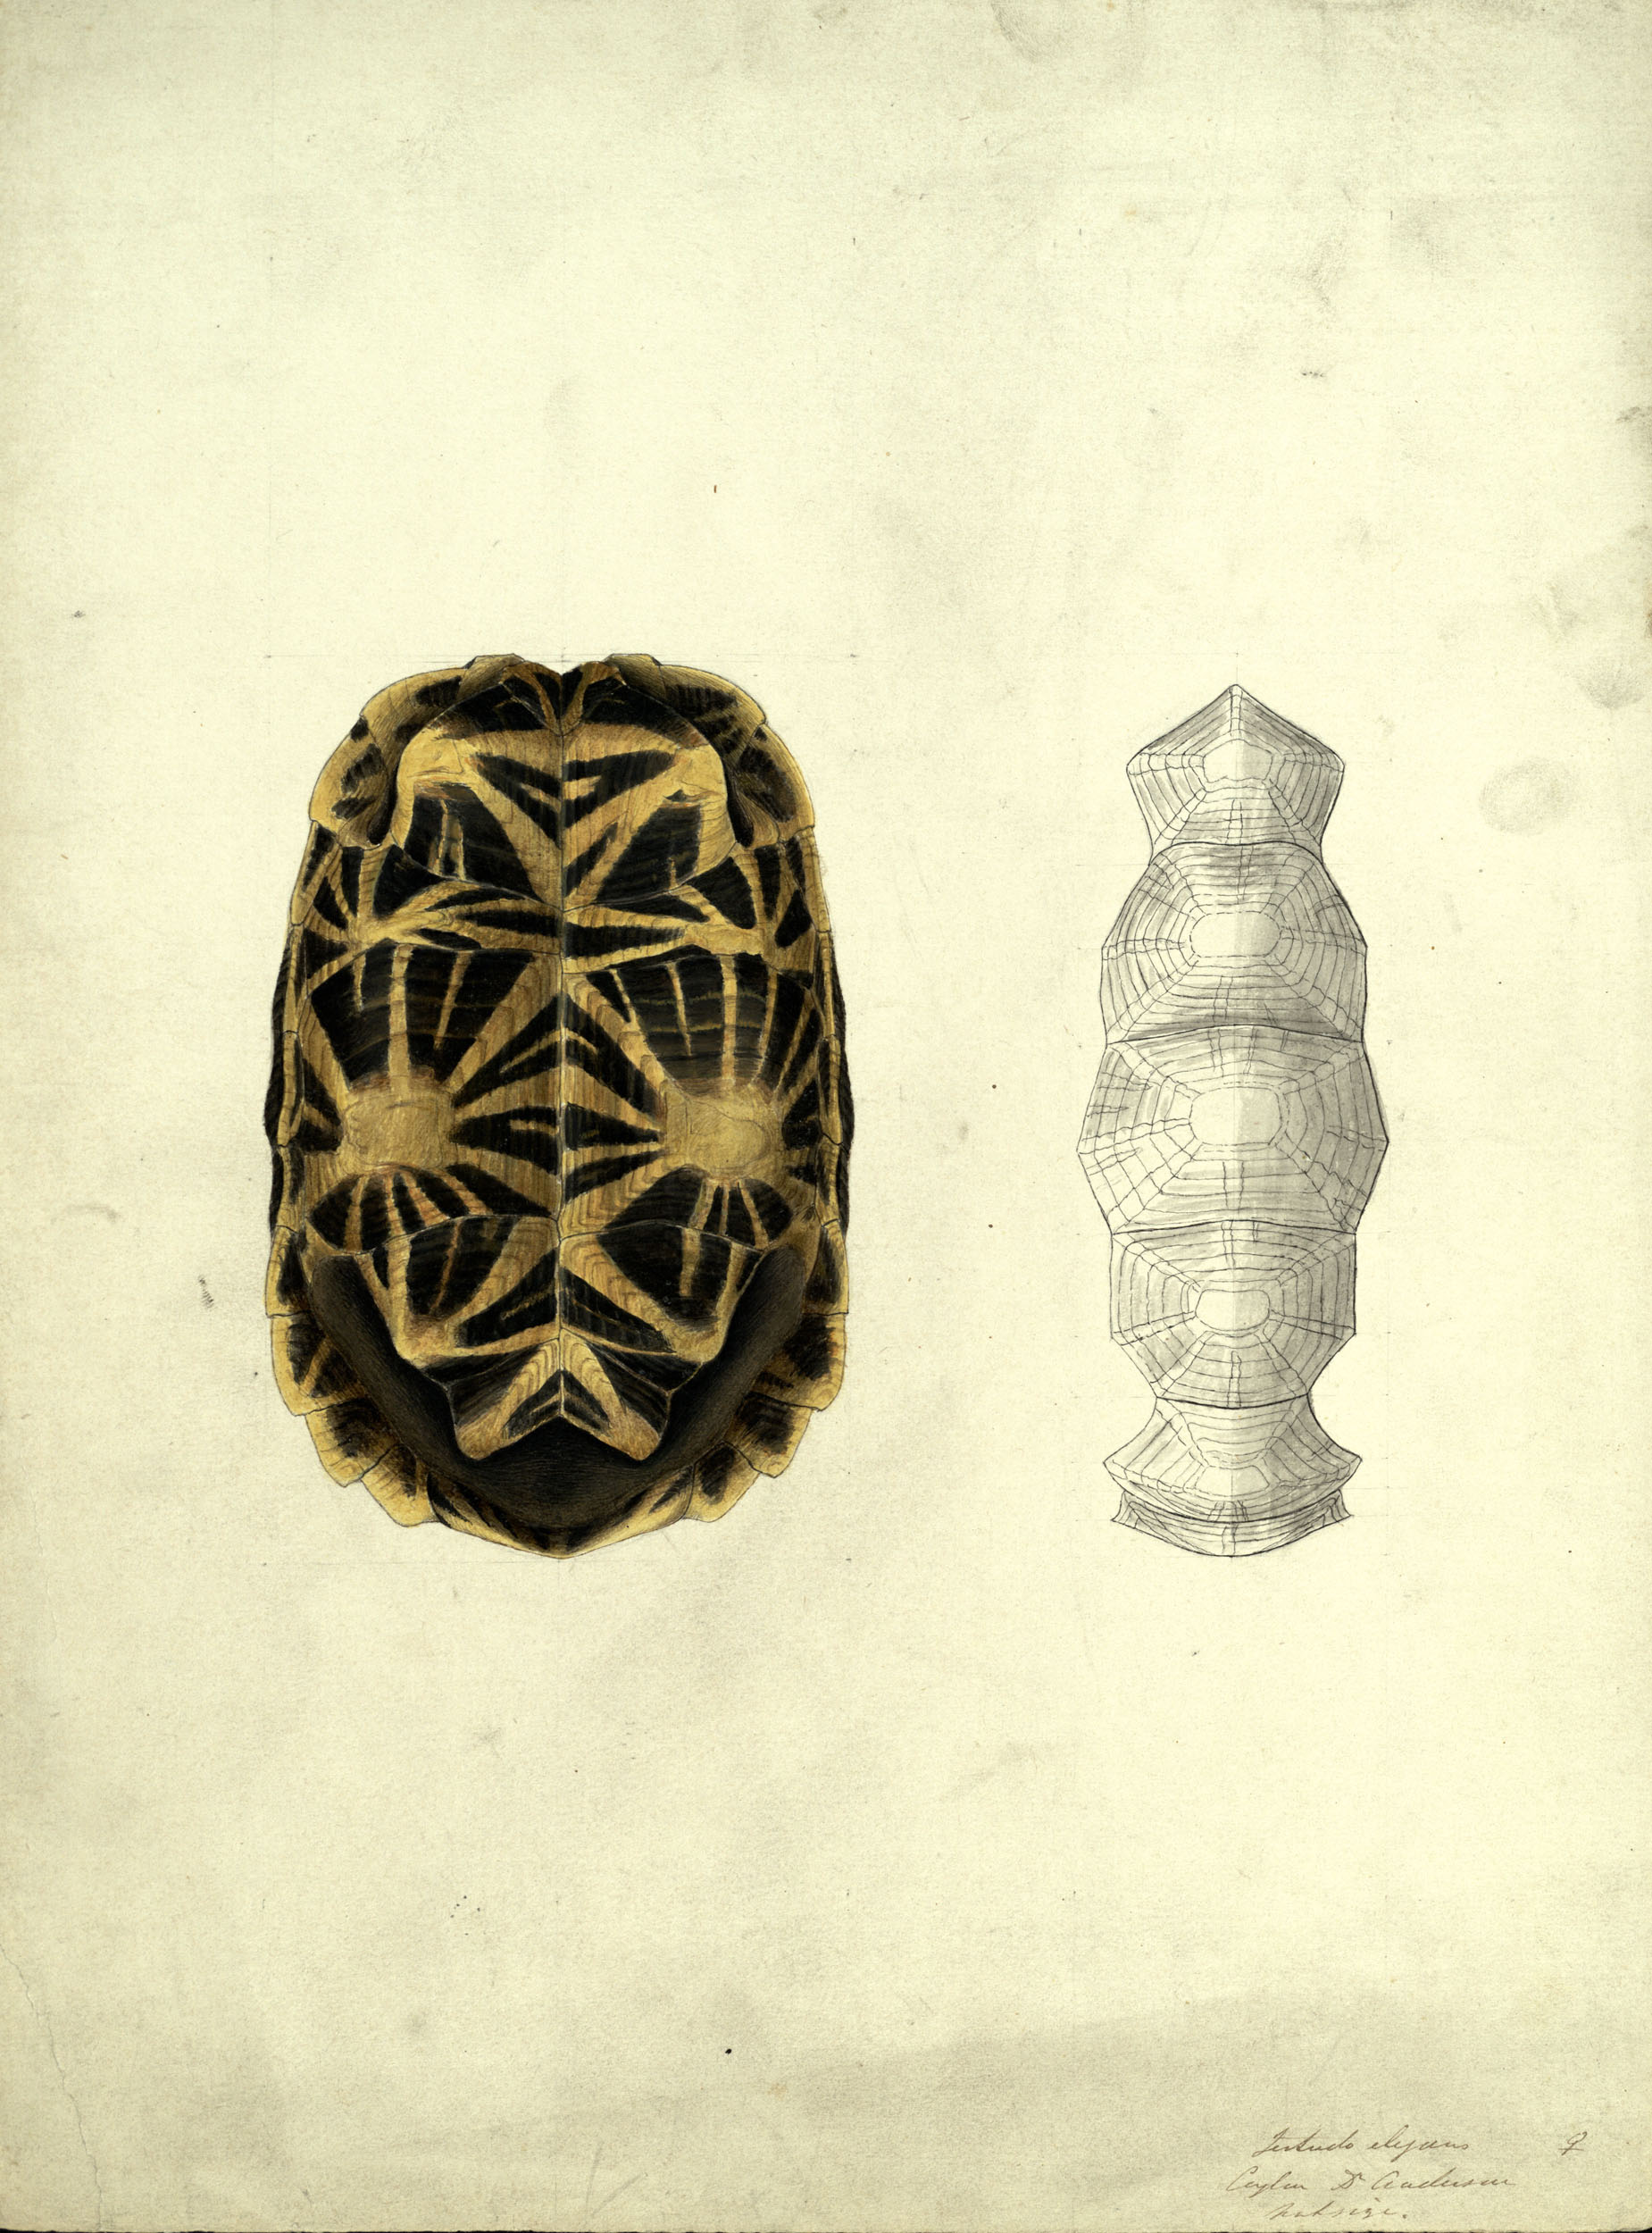 Hand-painted illustration and pencil diagram of an Indian star tortoise shell